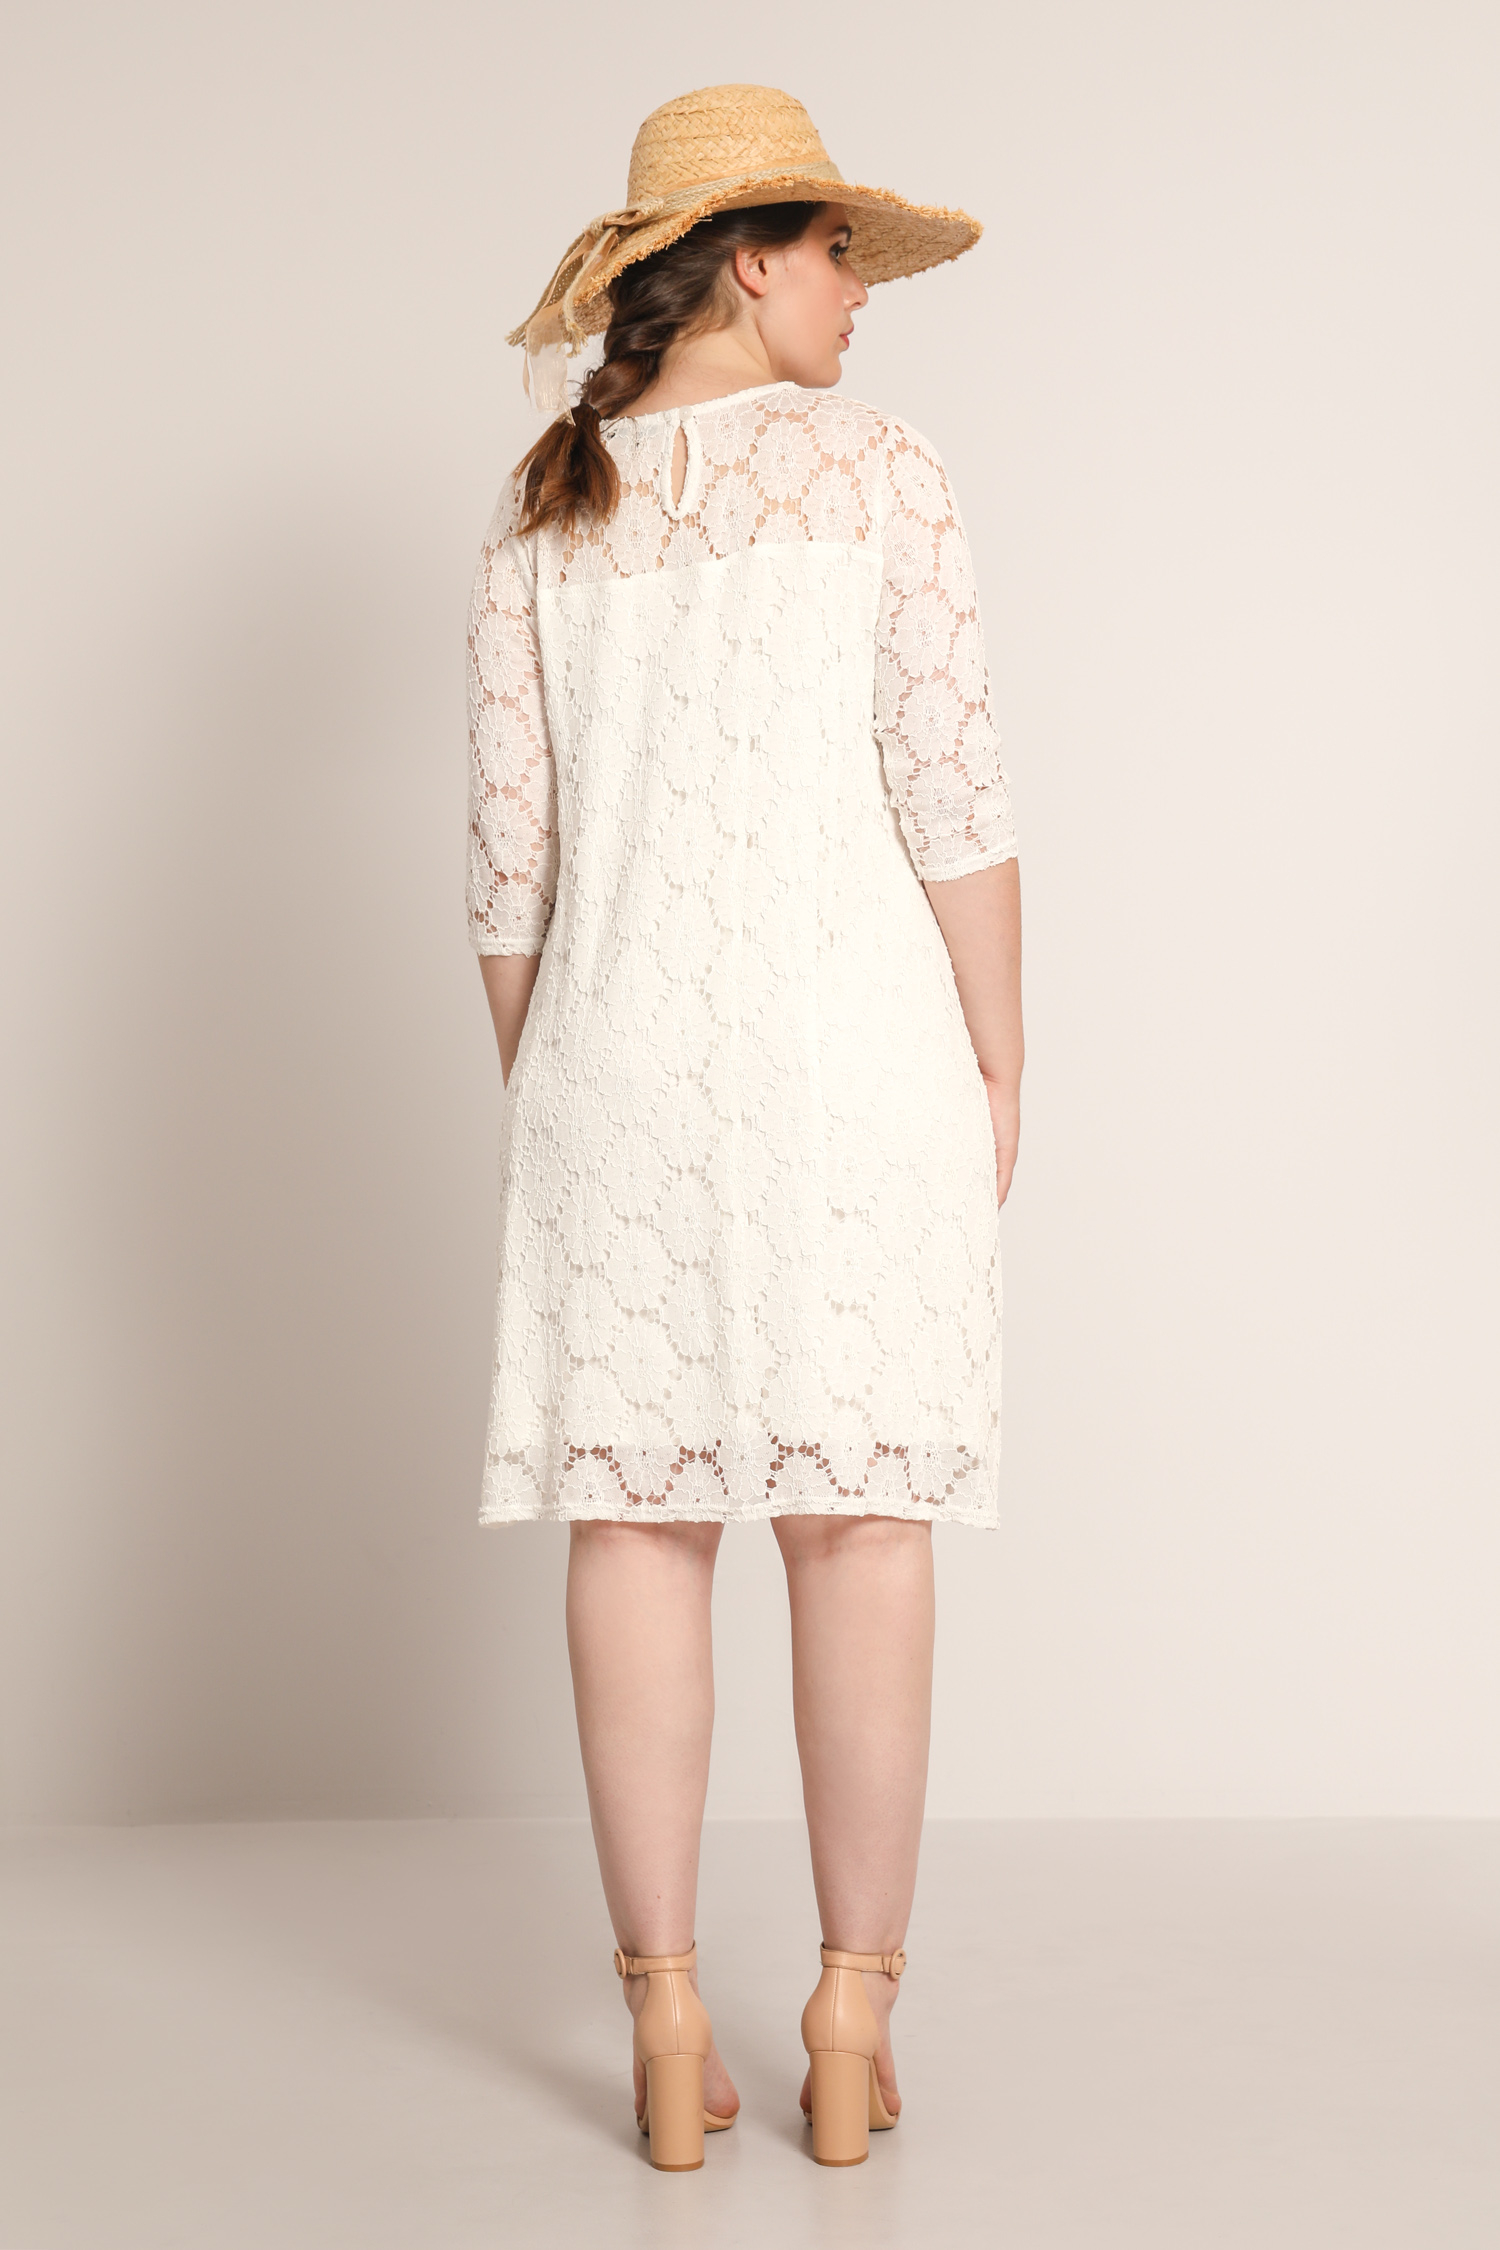 Straight lined lace dress